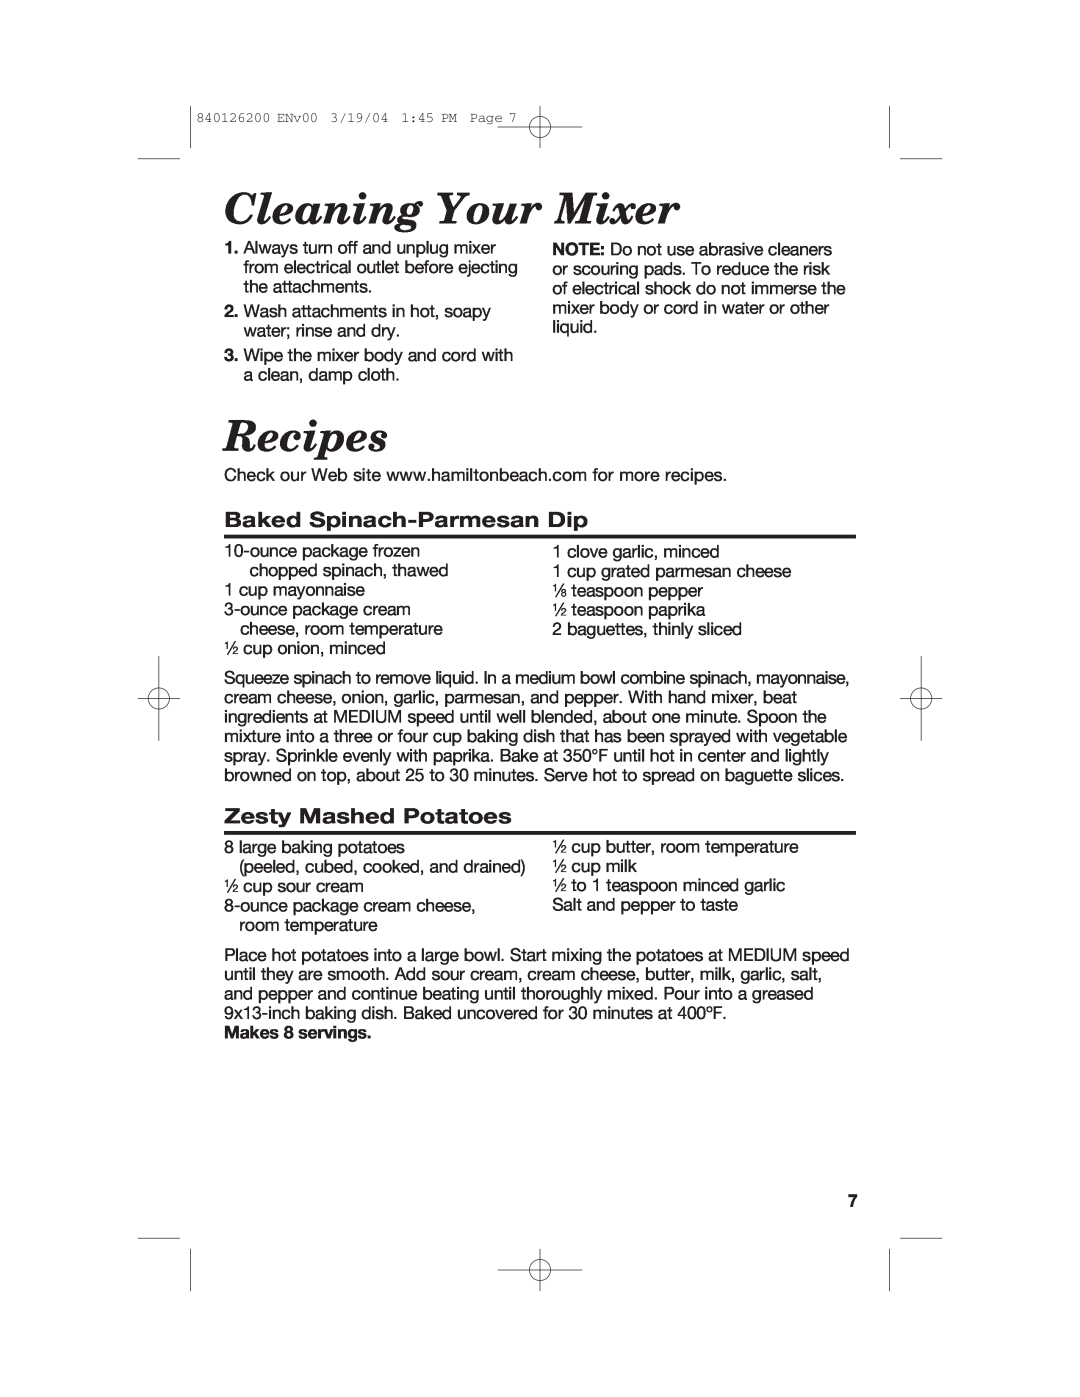 Hamilton Beach 62680C Cleaning Your Mixer, Recipes, Baked Spinach-ParmesanDip, Zesty Mashed Potatoes, Makes 8 servings 